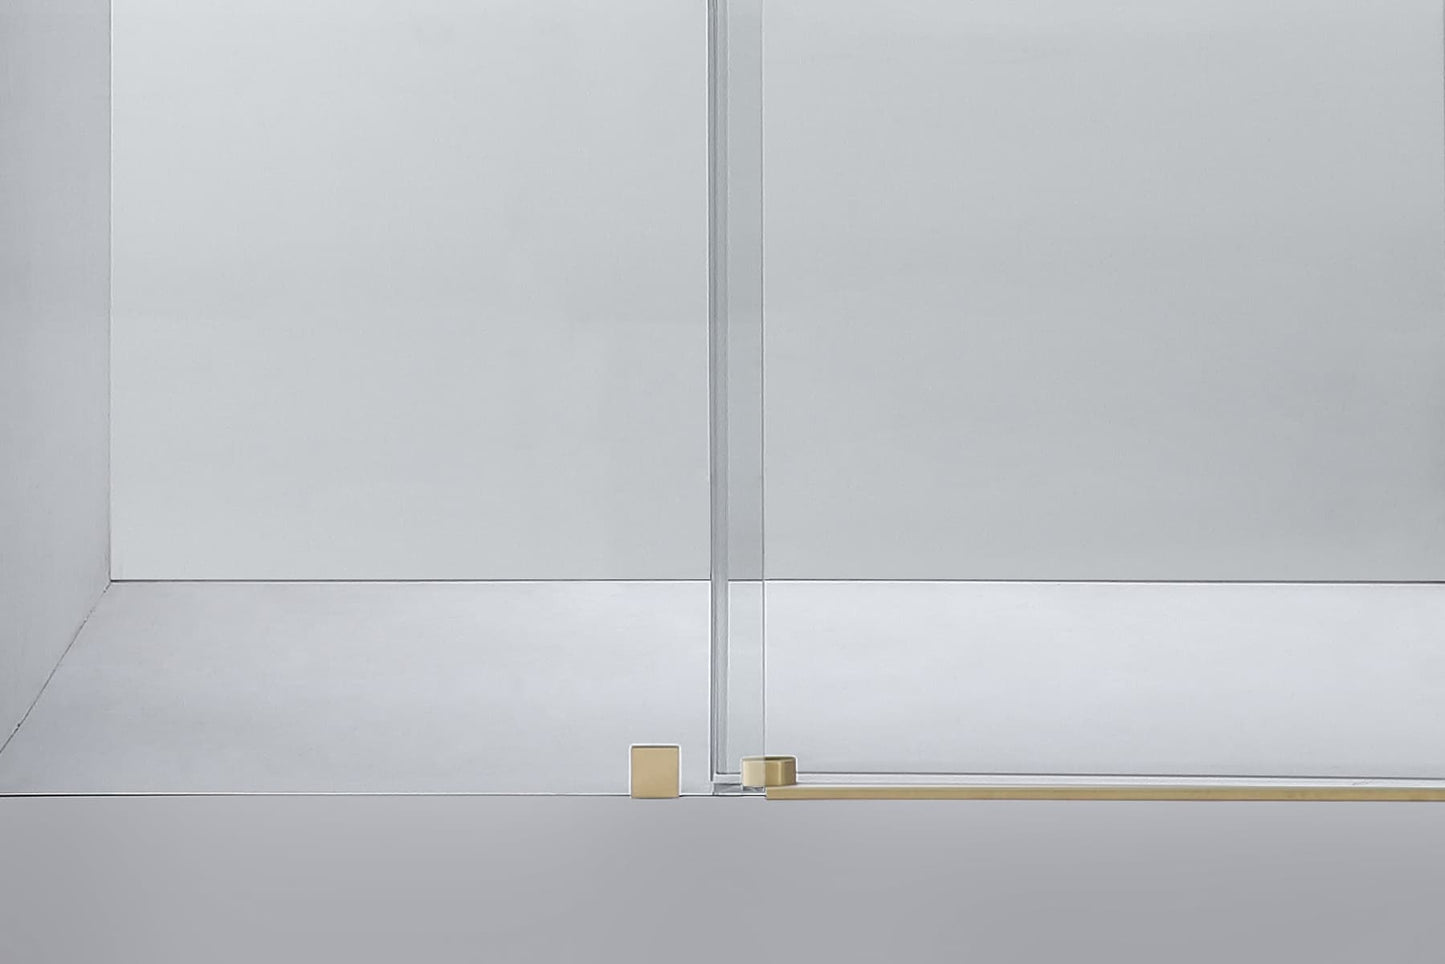 Ratel 4 WHEELS ROUND FRAMELESS 10MM THICK TEMPERED GLASS SHOWER DOOR ON BATHTUB 60"W x 58"H - Brushed Gold